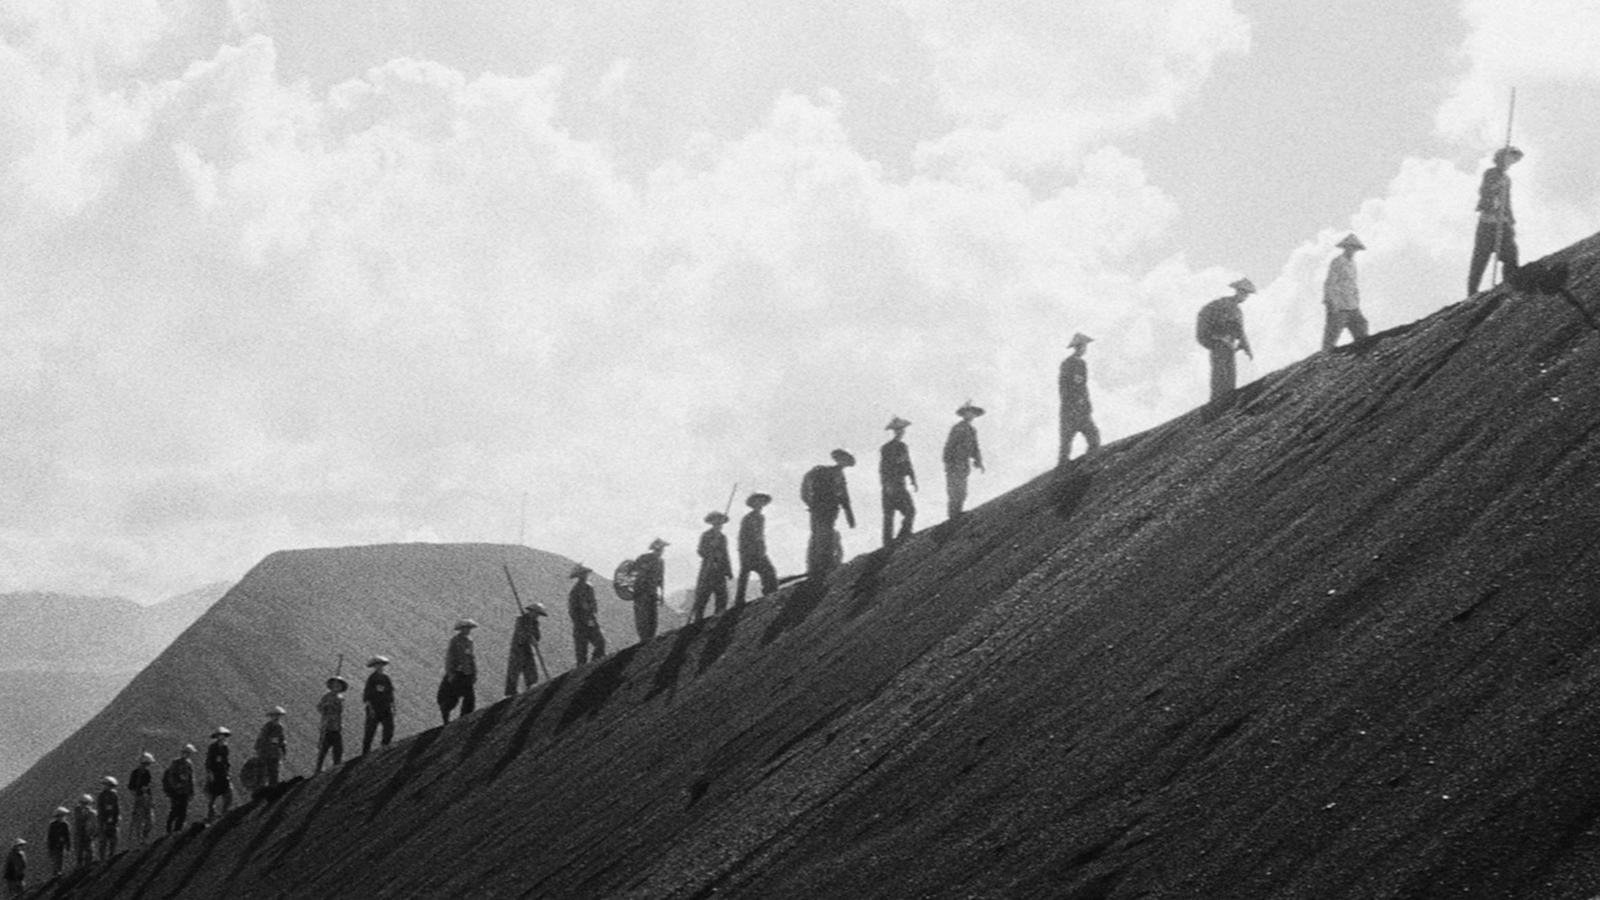 a black and white picture of men climbing a hill in a desolated place against a cloudy sky